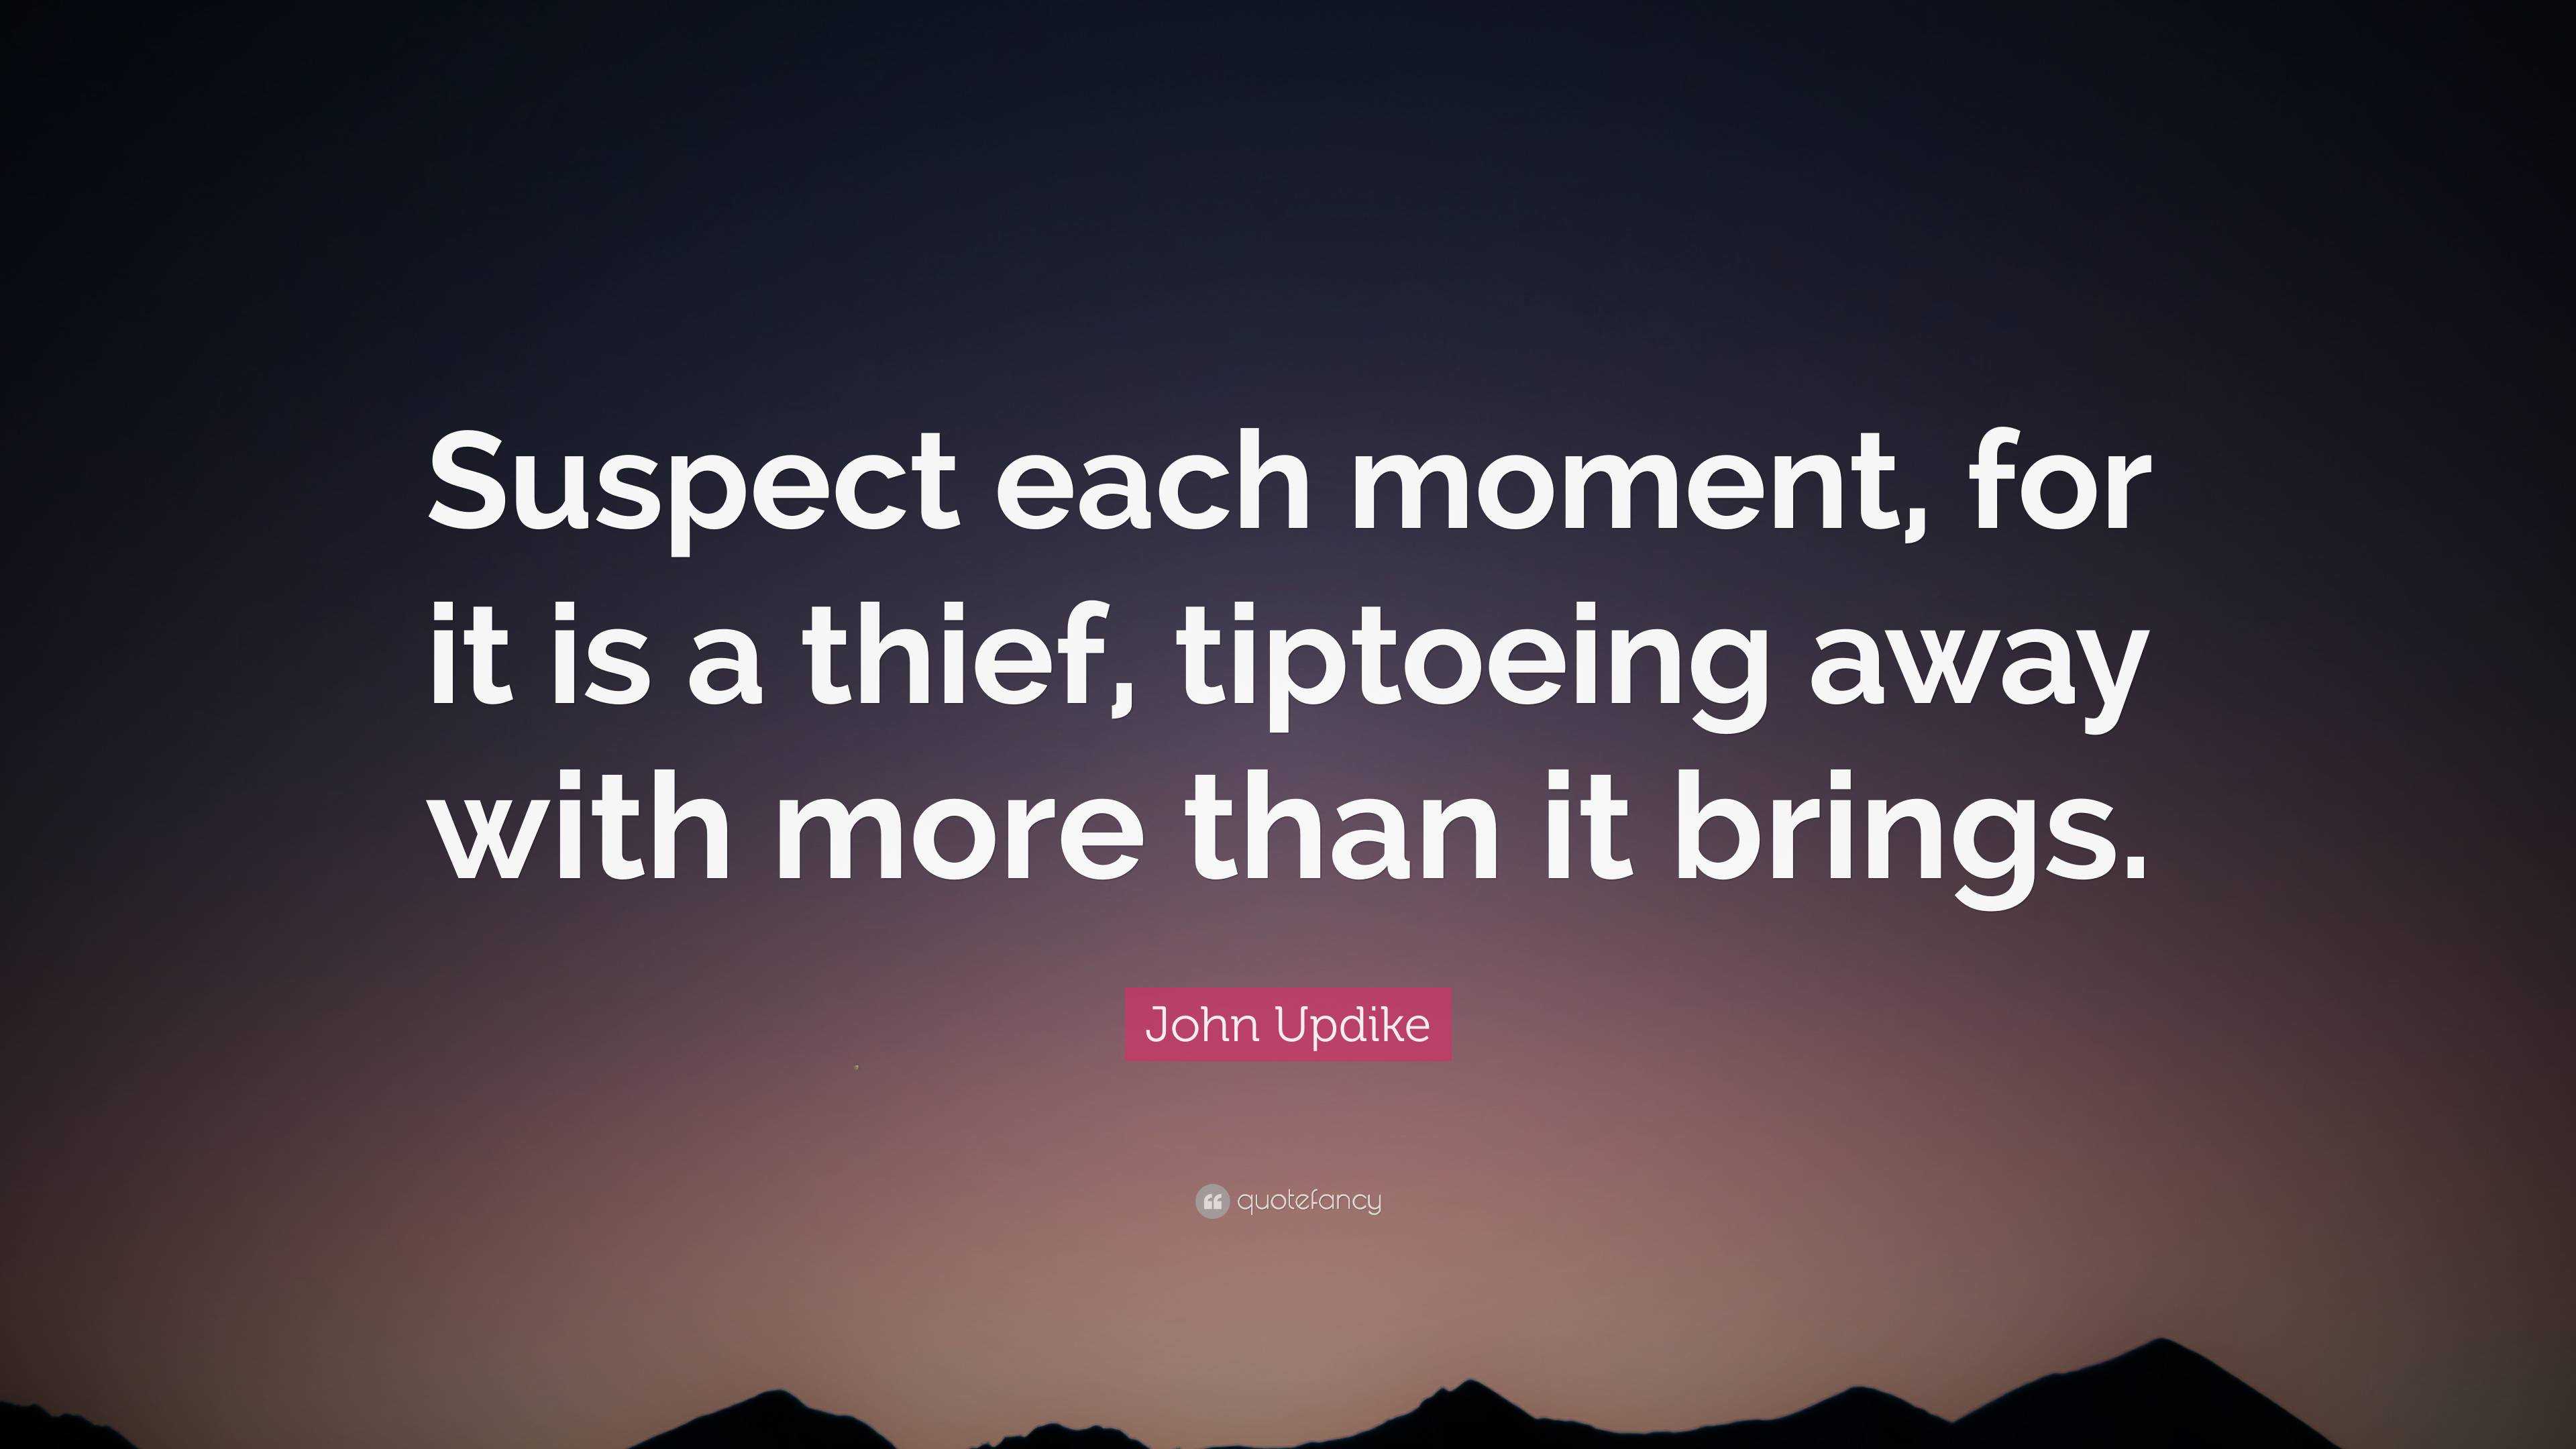 John Updike Quote: “Suspect each moment, for it is a thief, tiptoeing ...